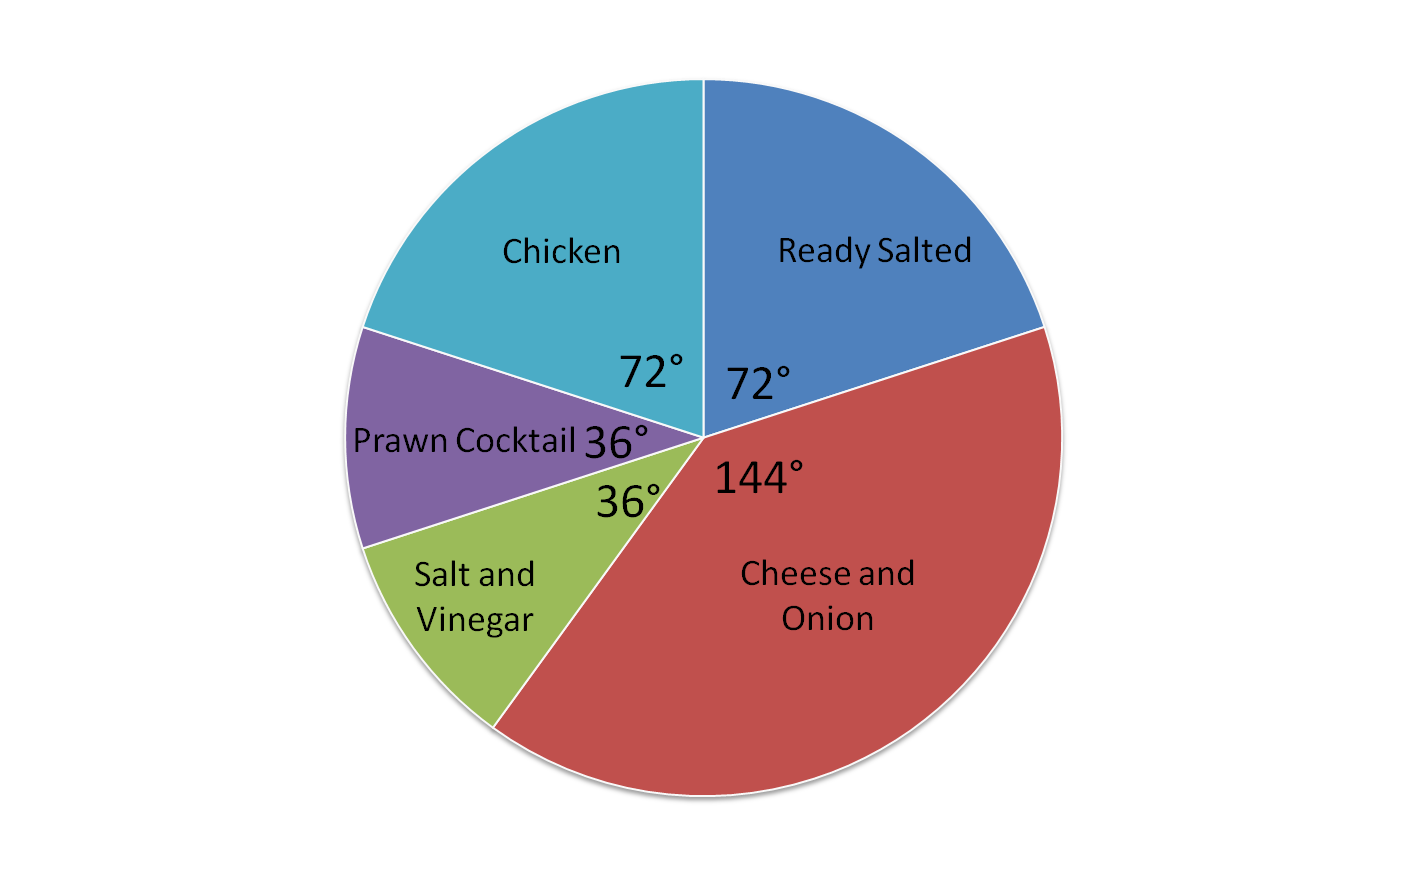 This pie chart shows the results of a survey on favourite crisp flavours.